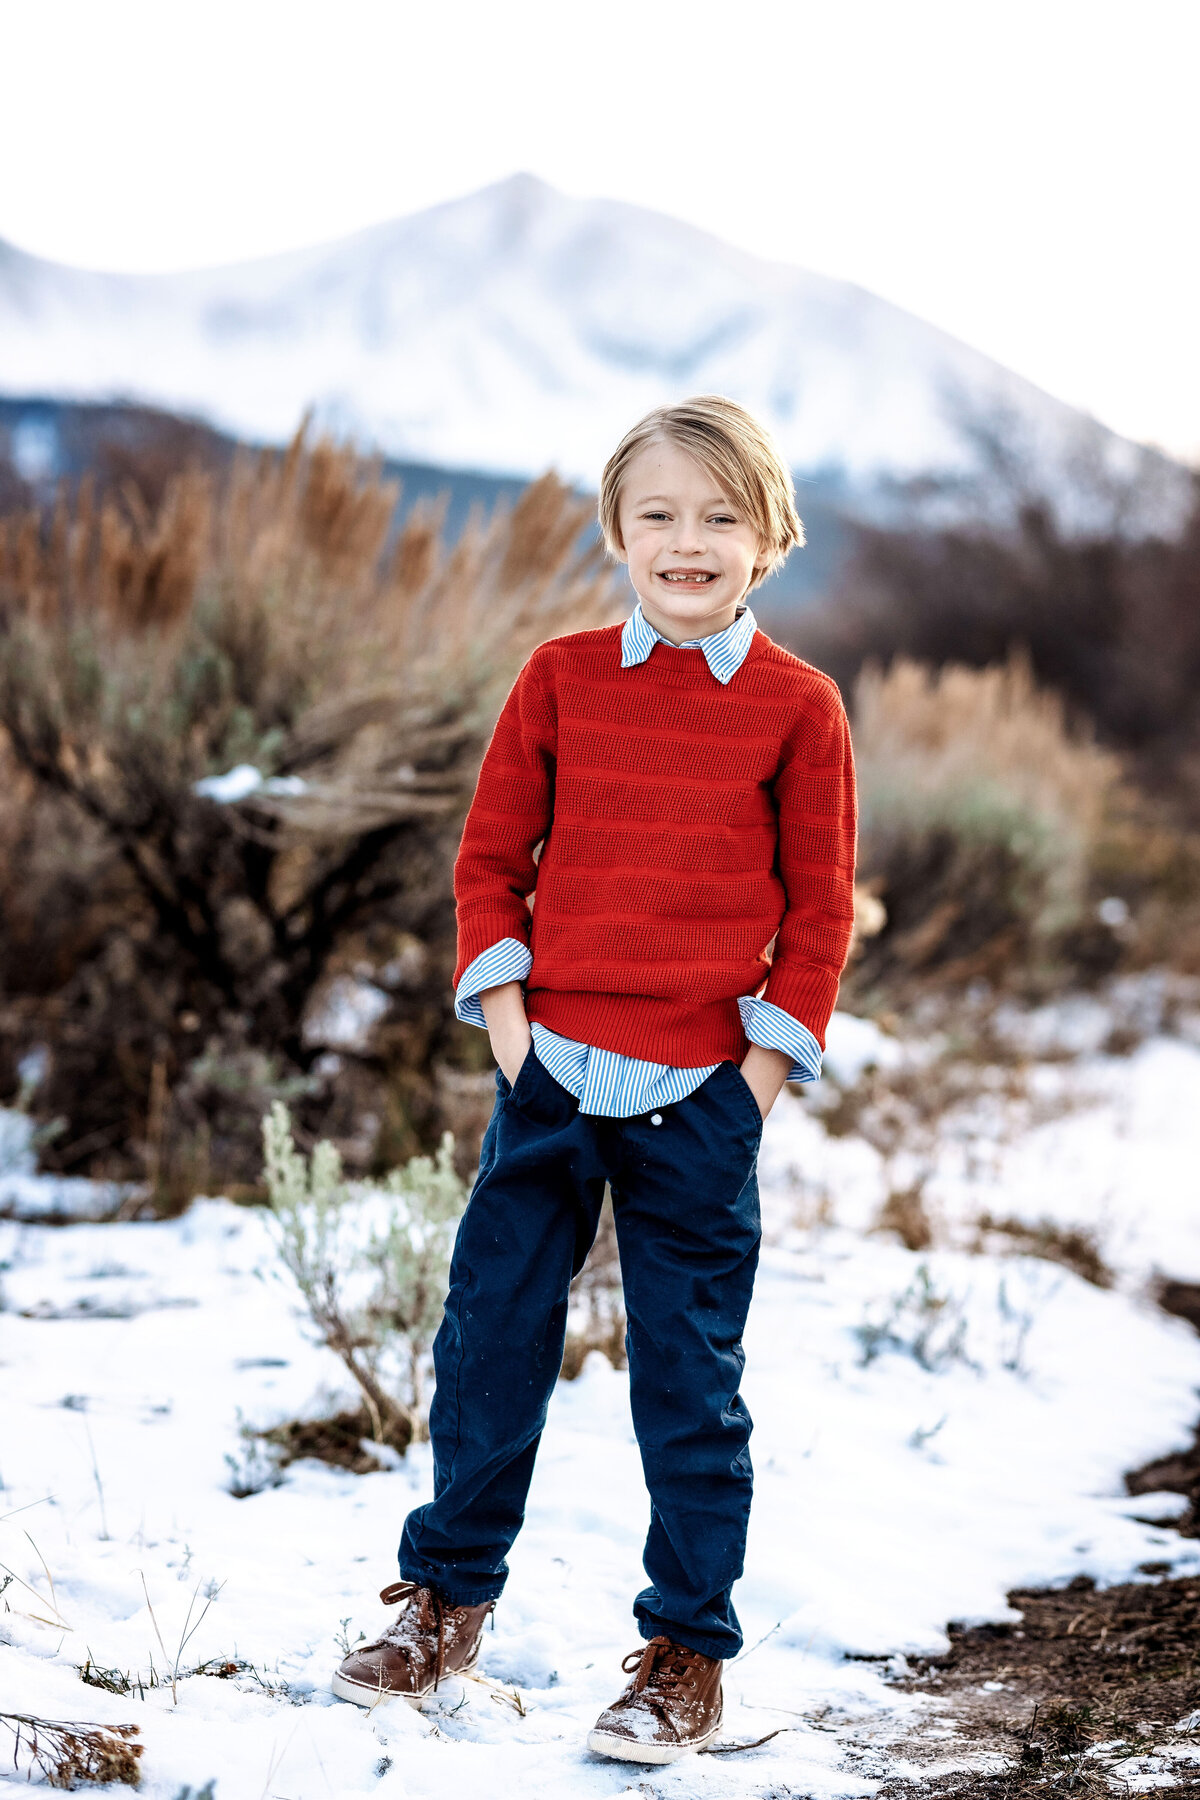 A happy little boy wearing a bright red sweater, smiling for the camera.